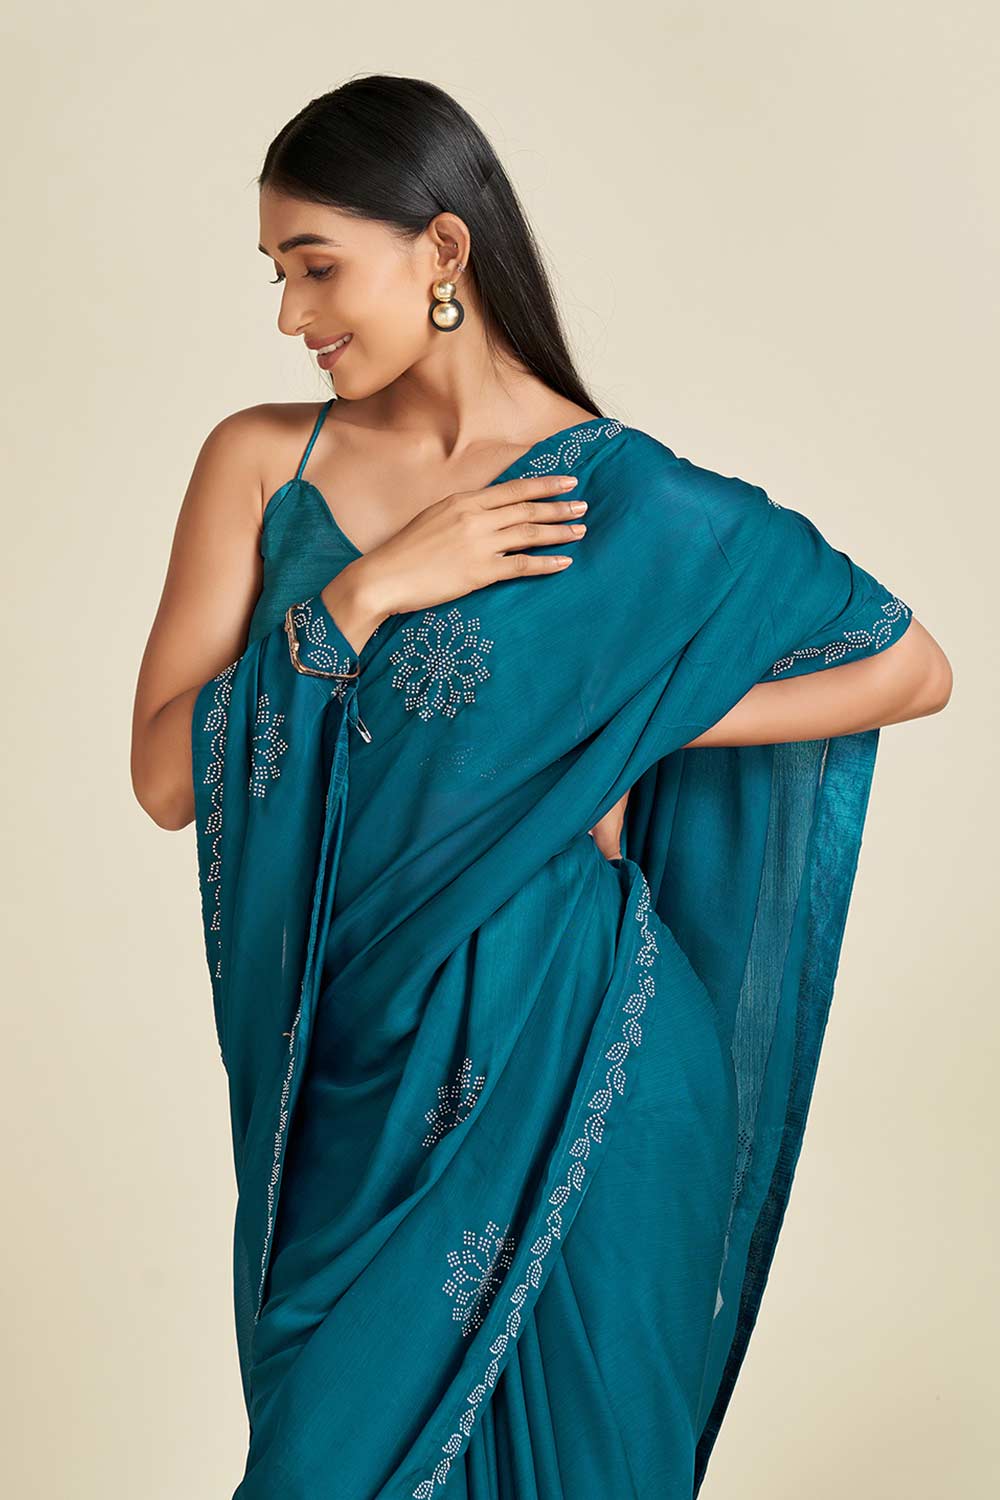 Shop Kirti Teal Blue Satin Stone Work One Minute Saree at best offer at our  Store - One Minute Saree